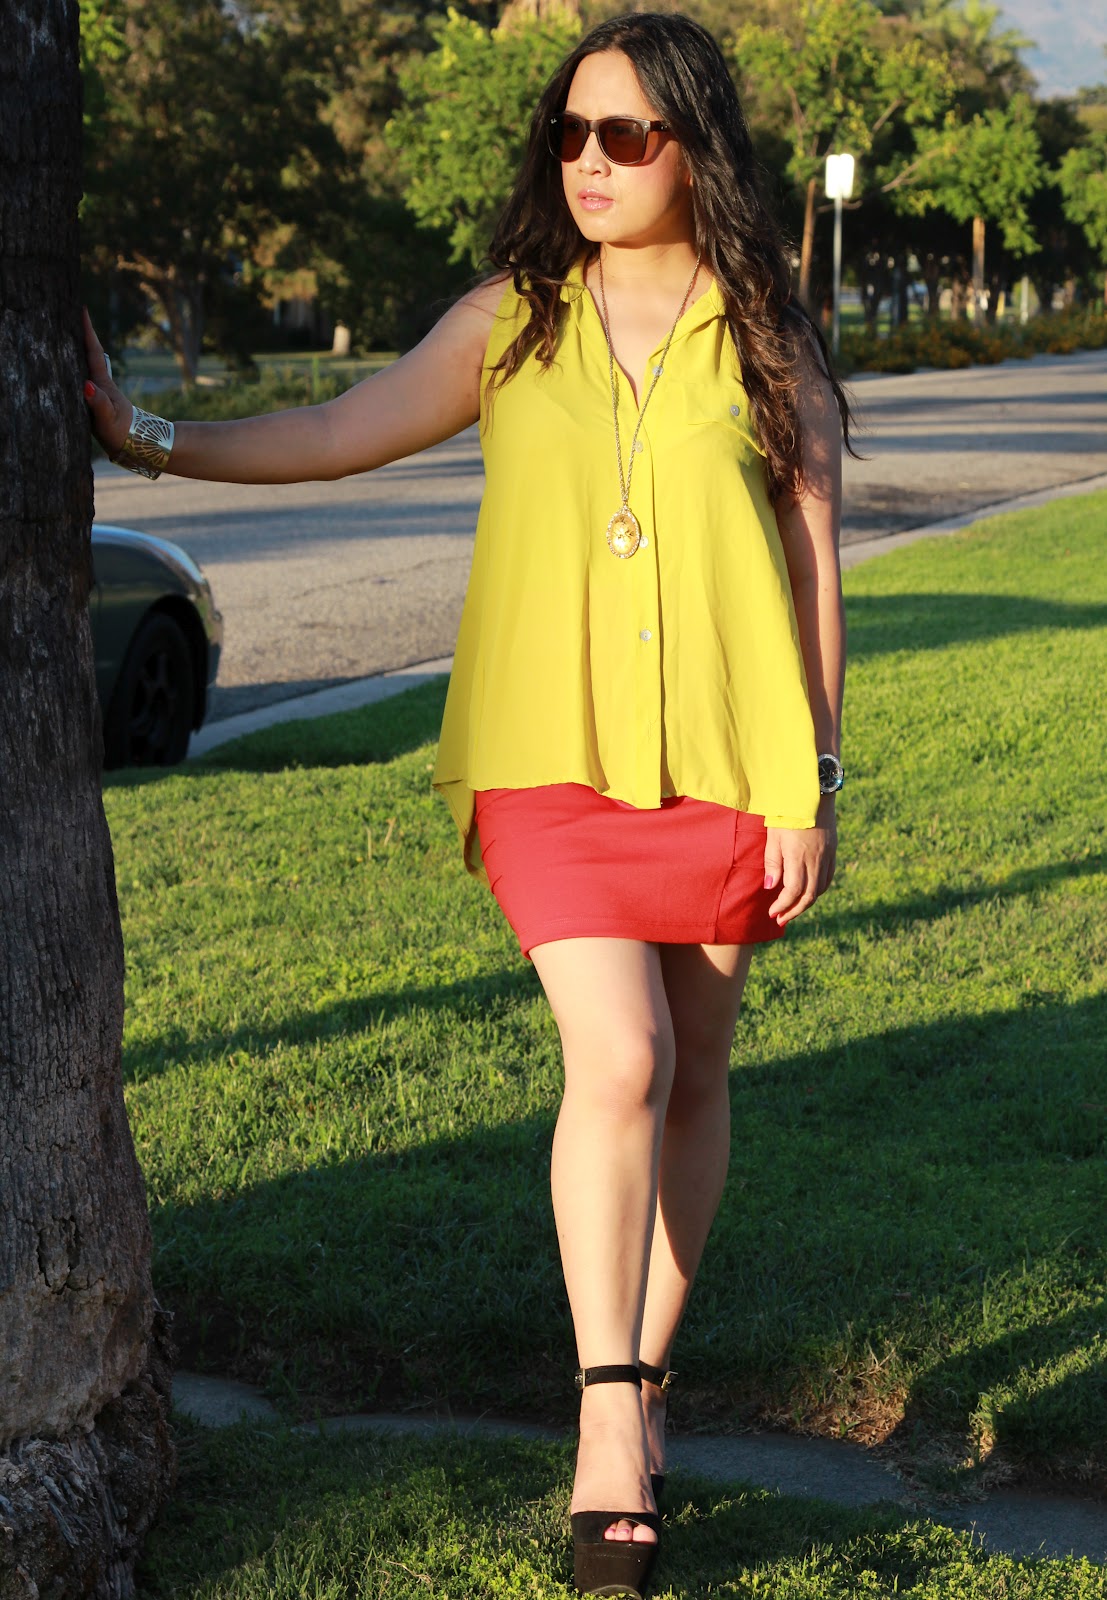 Joice from the blog Love Joice wearing a yellow top with a red skirt